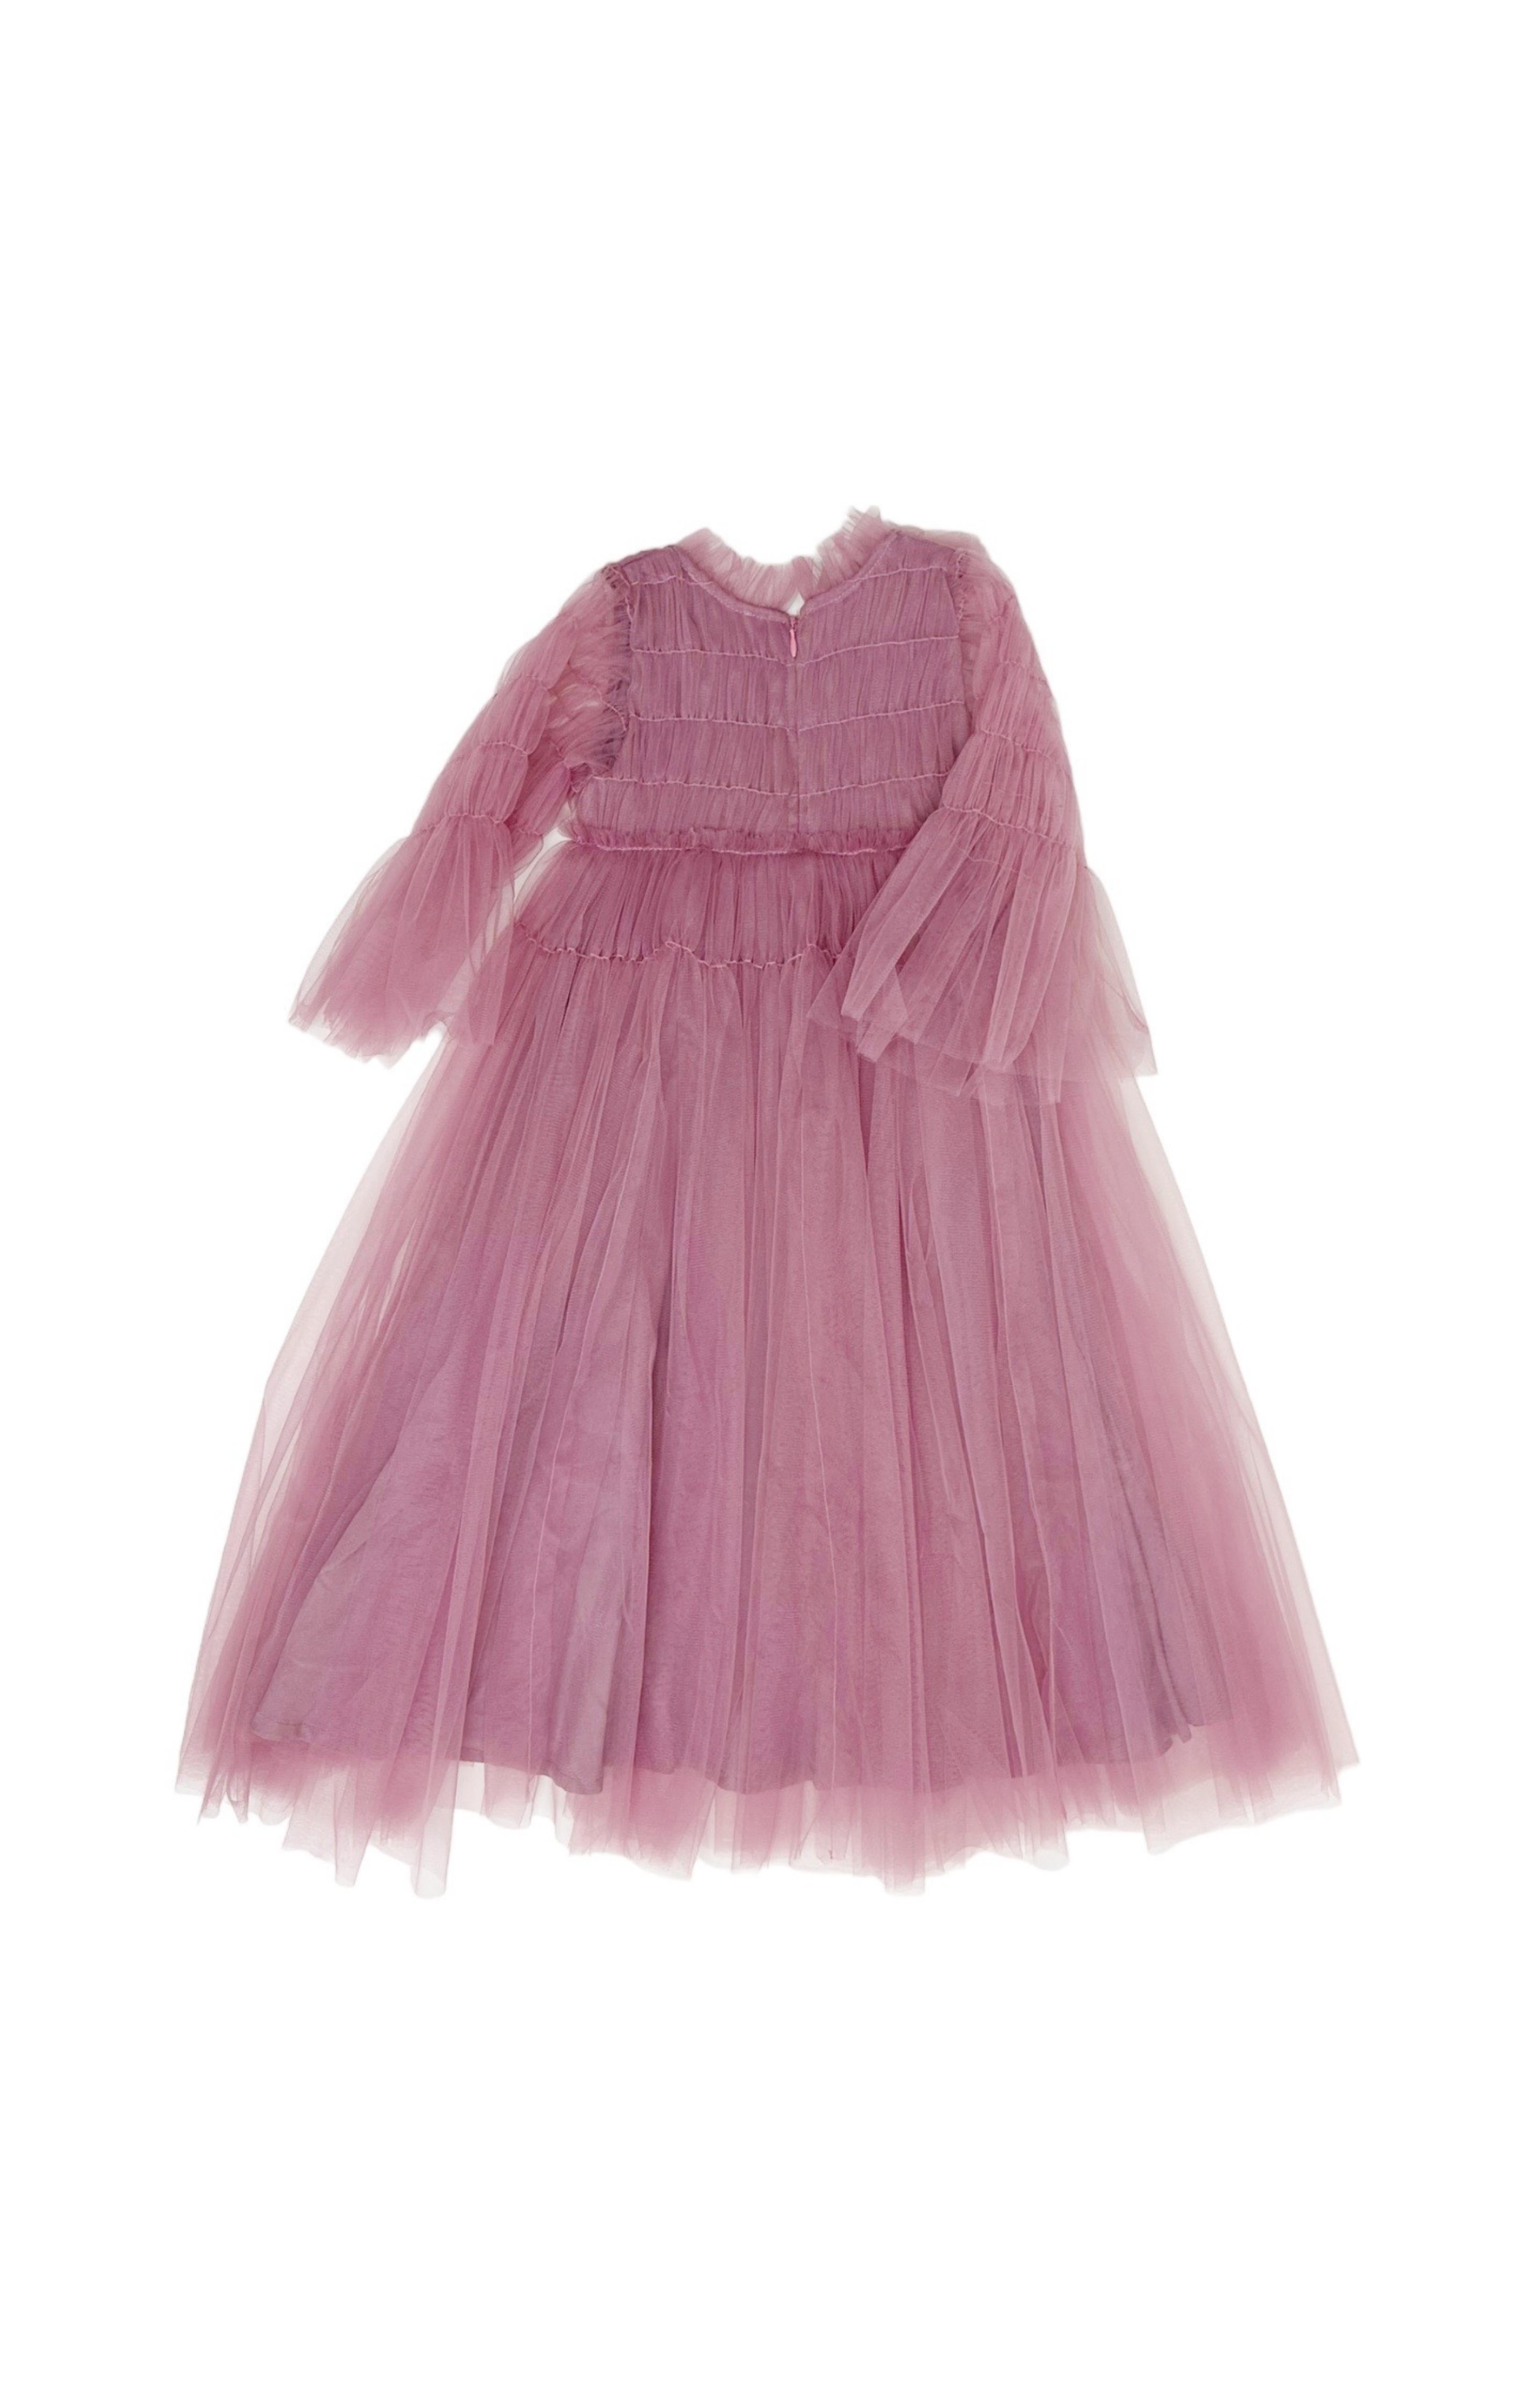 RASPBERRY PLUM (NEW) with tags Dress Size: 3-4 Years